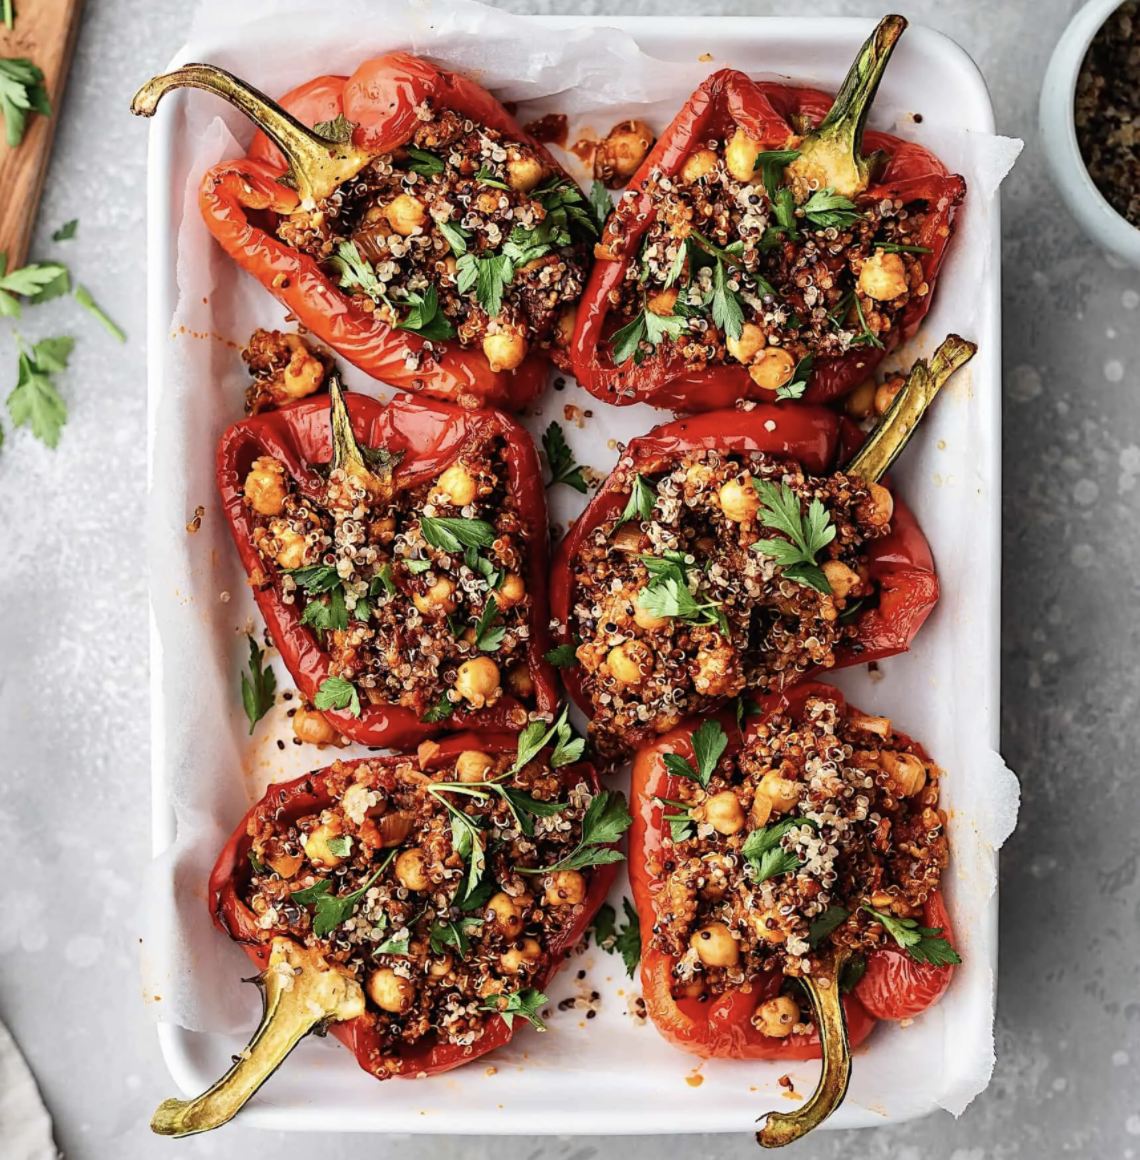 Chickpea and Quinoa Harissa Stuffed Peppers